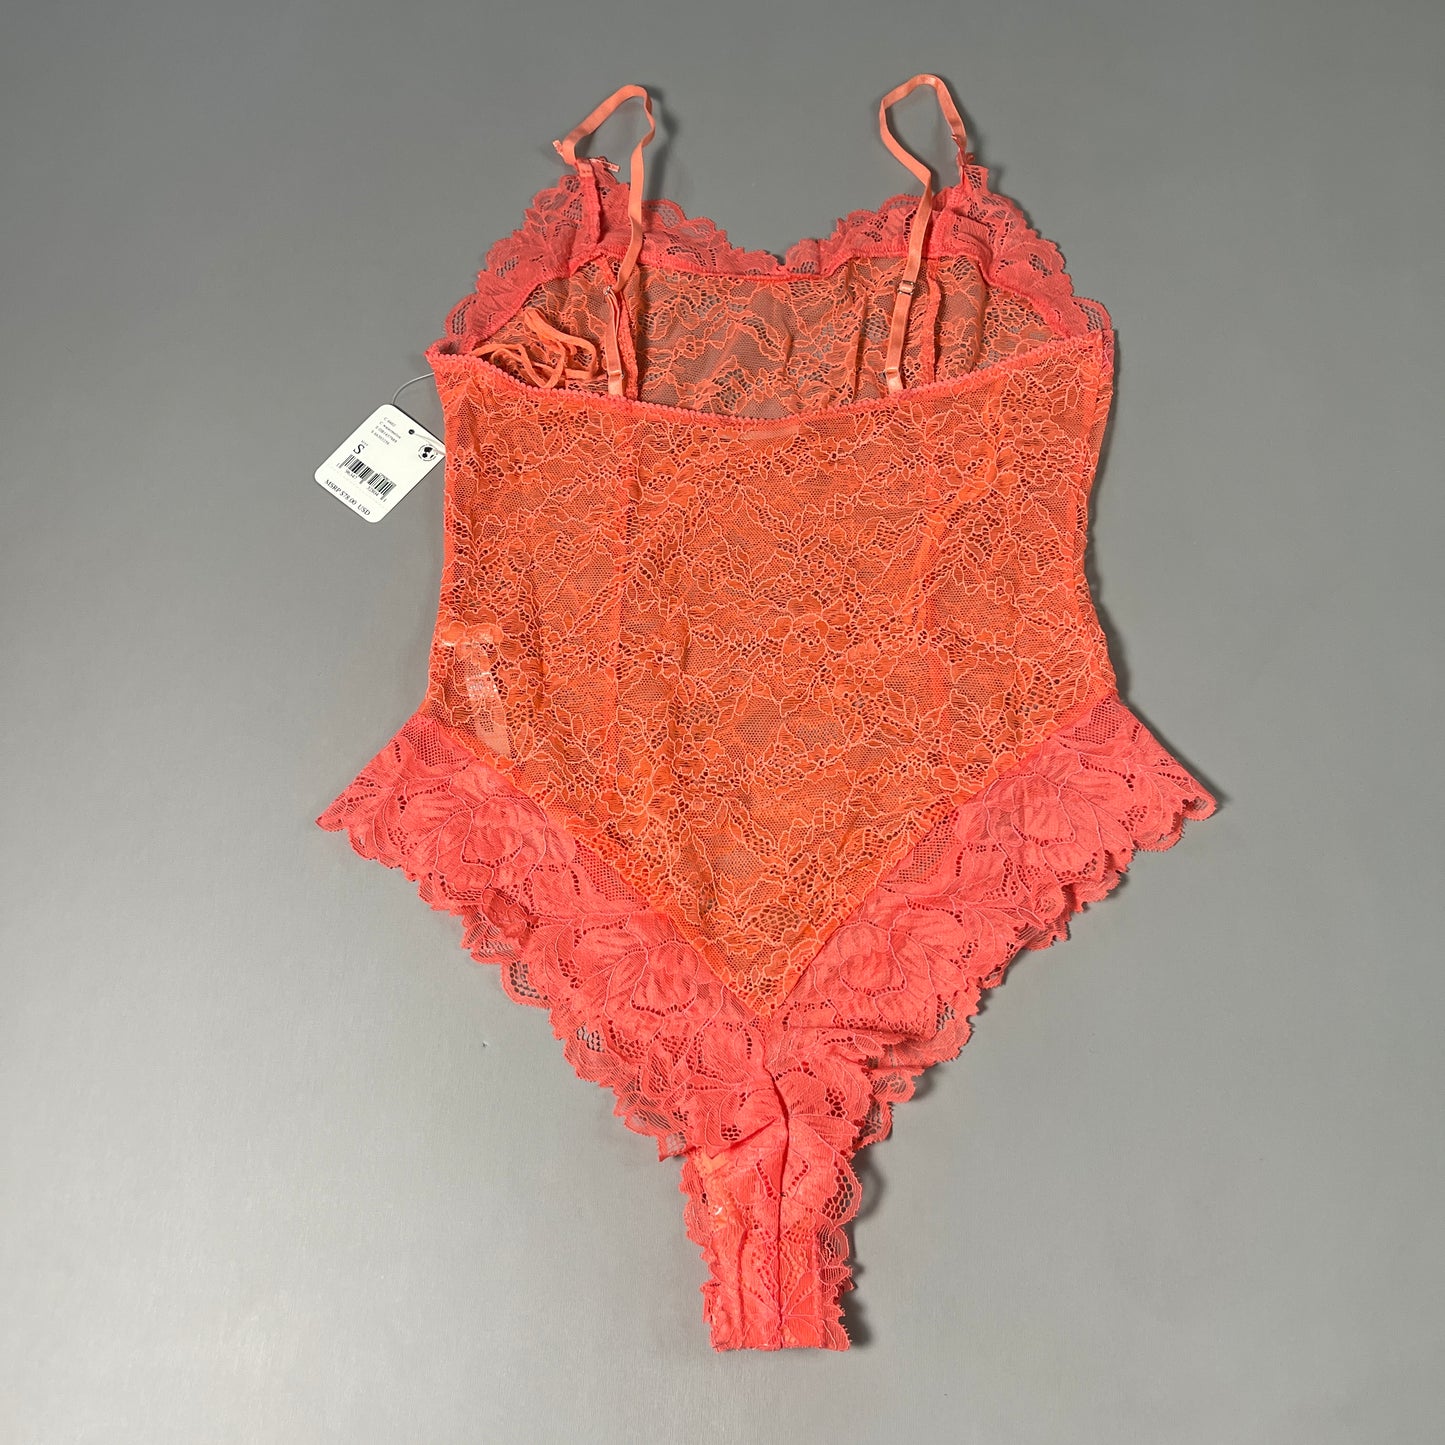 FREE PEOPLE Sheer One Touch Bodysuit Leotard Women's Sz S Watermelon Lace OB1457989 (New)